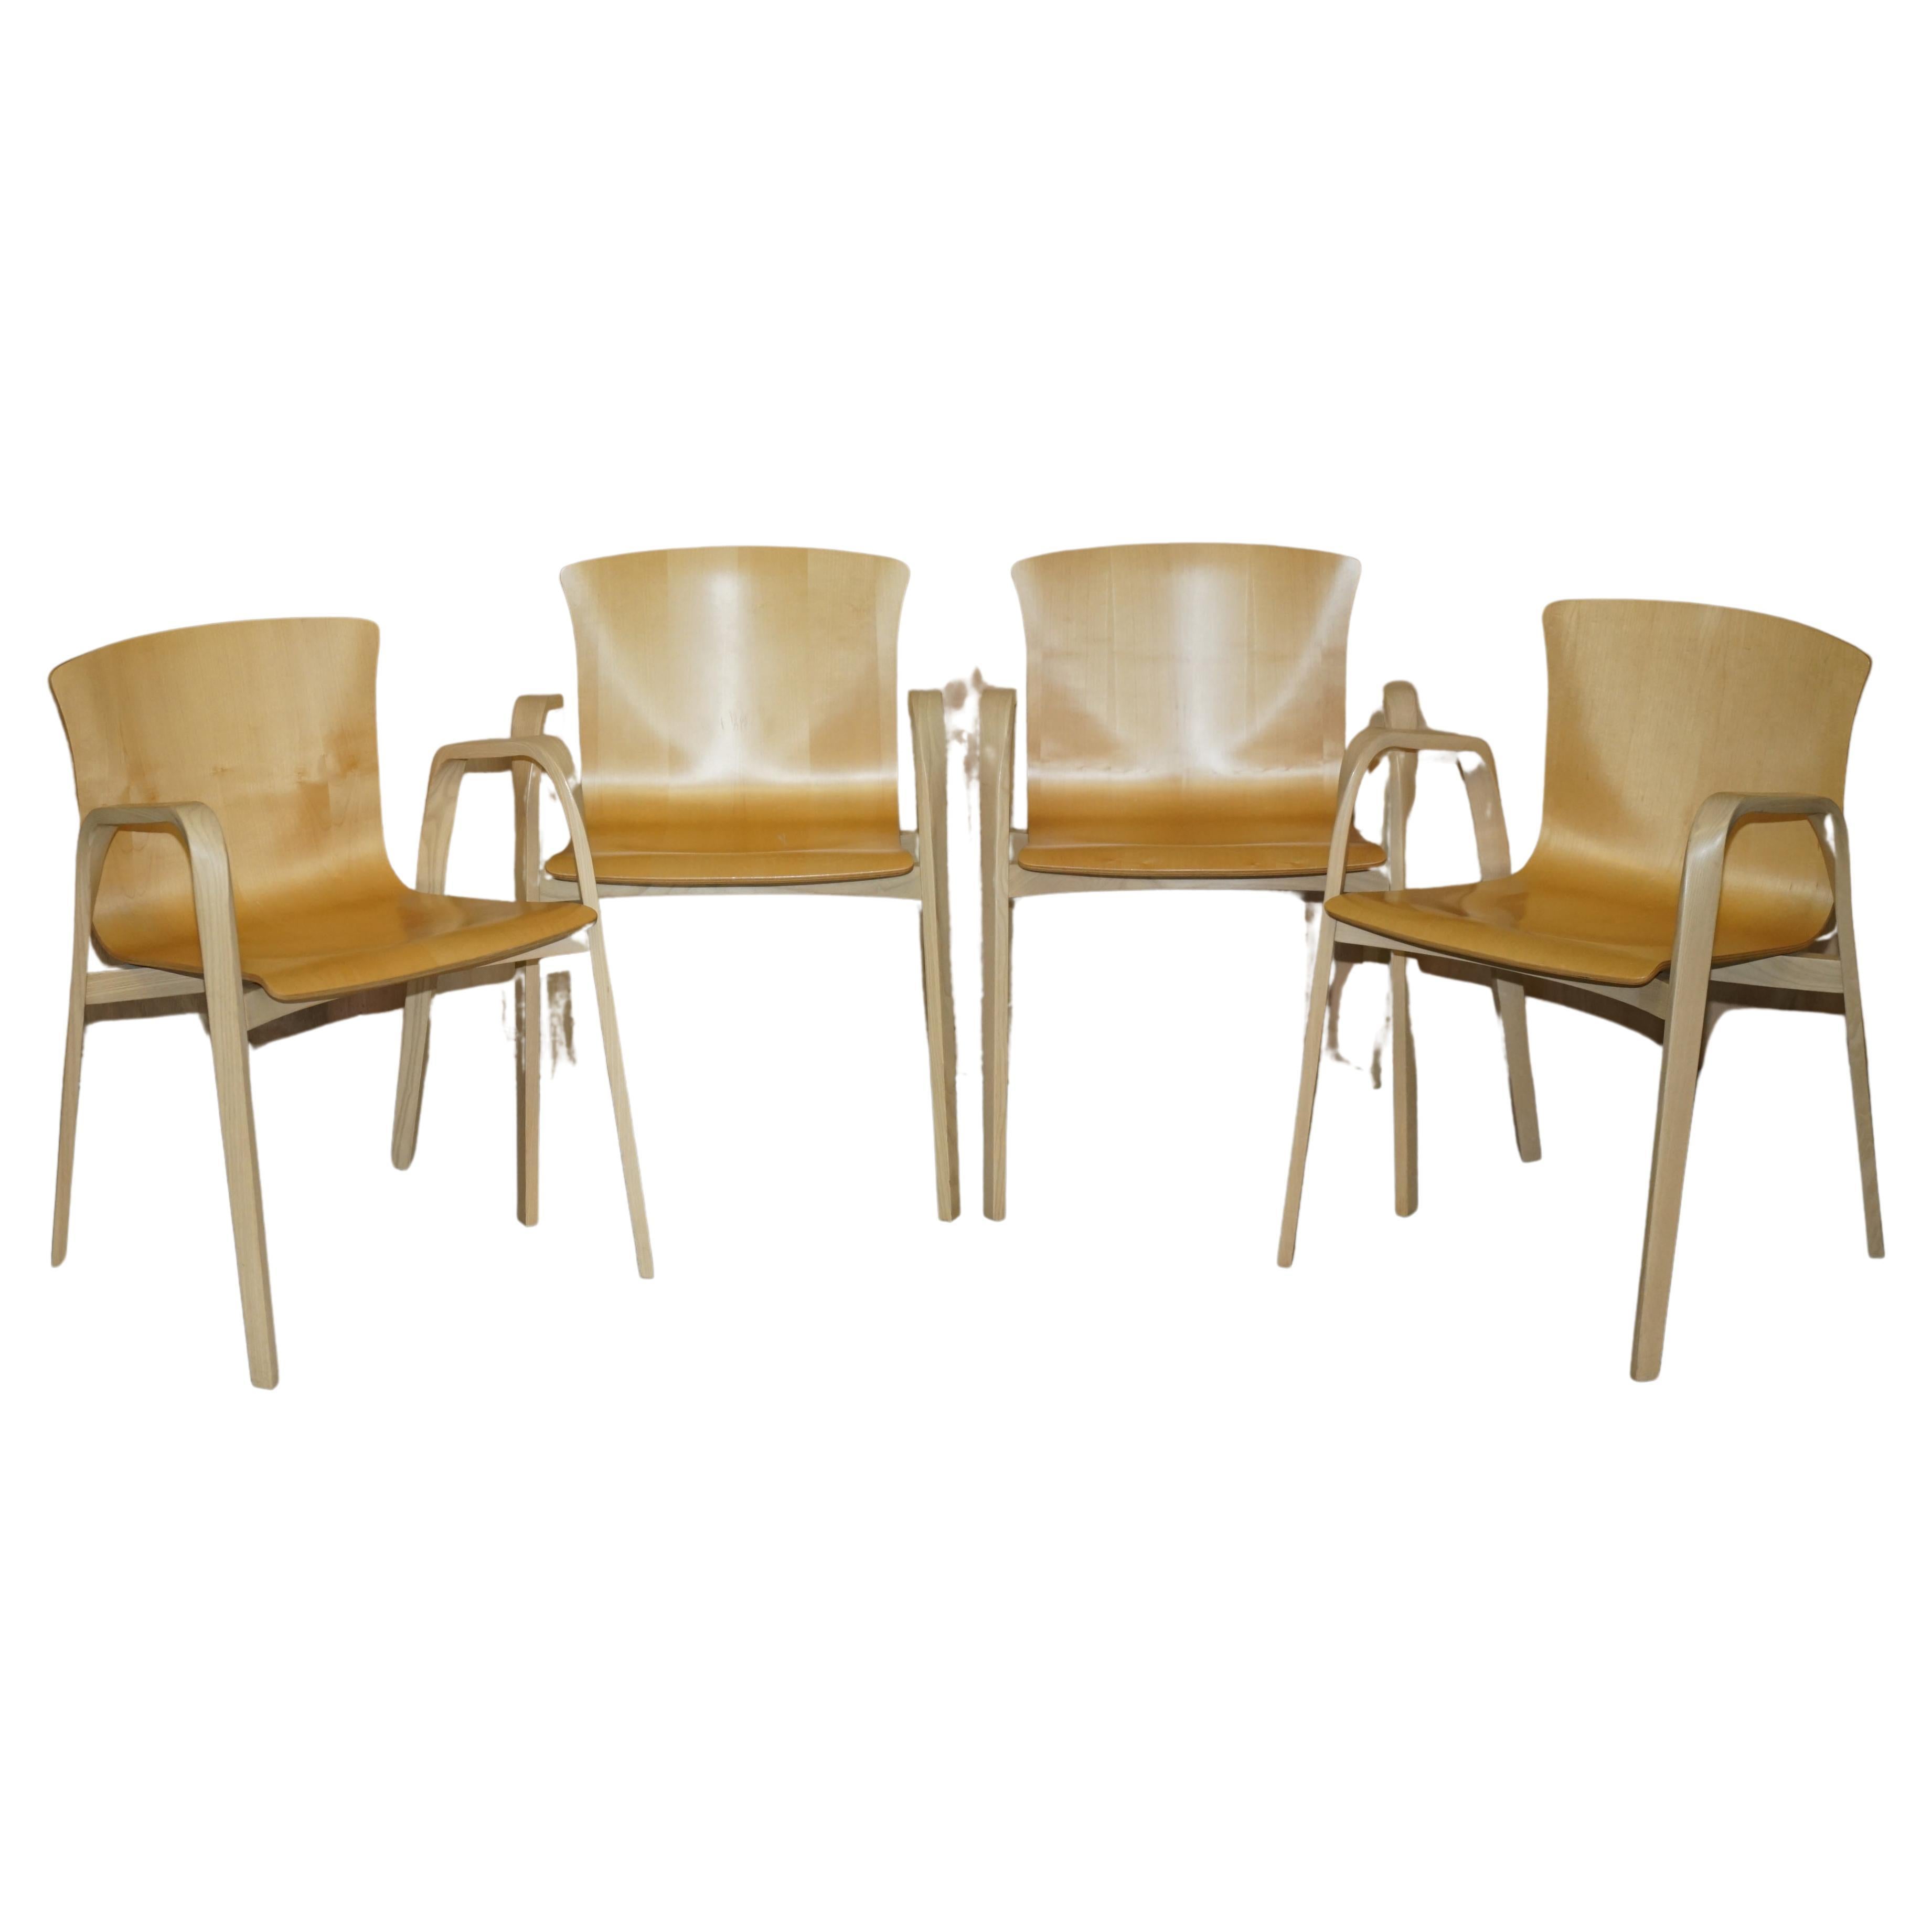 FOUR CIRENE 03 DINING ARMCHAIRS DESiGNED BY VICO MAGISTRETTI FOR DE PADOVA For Sale